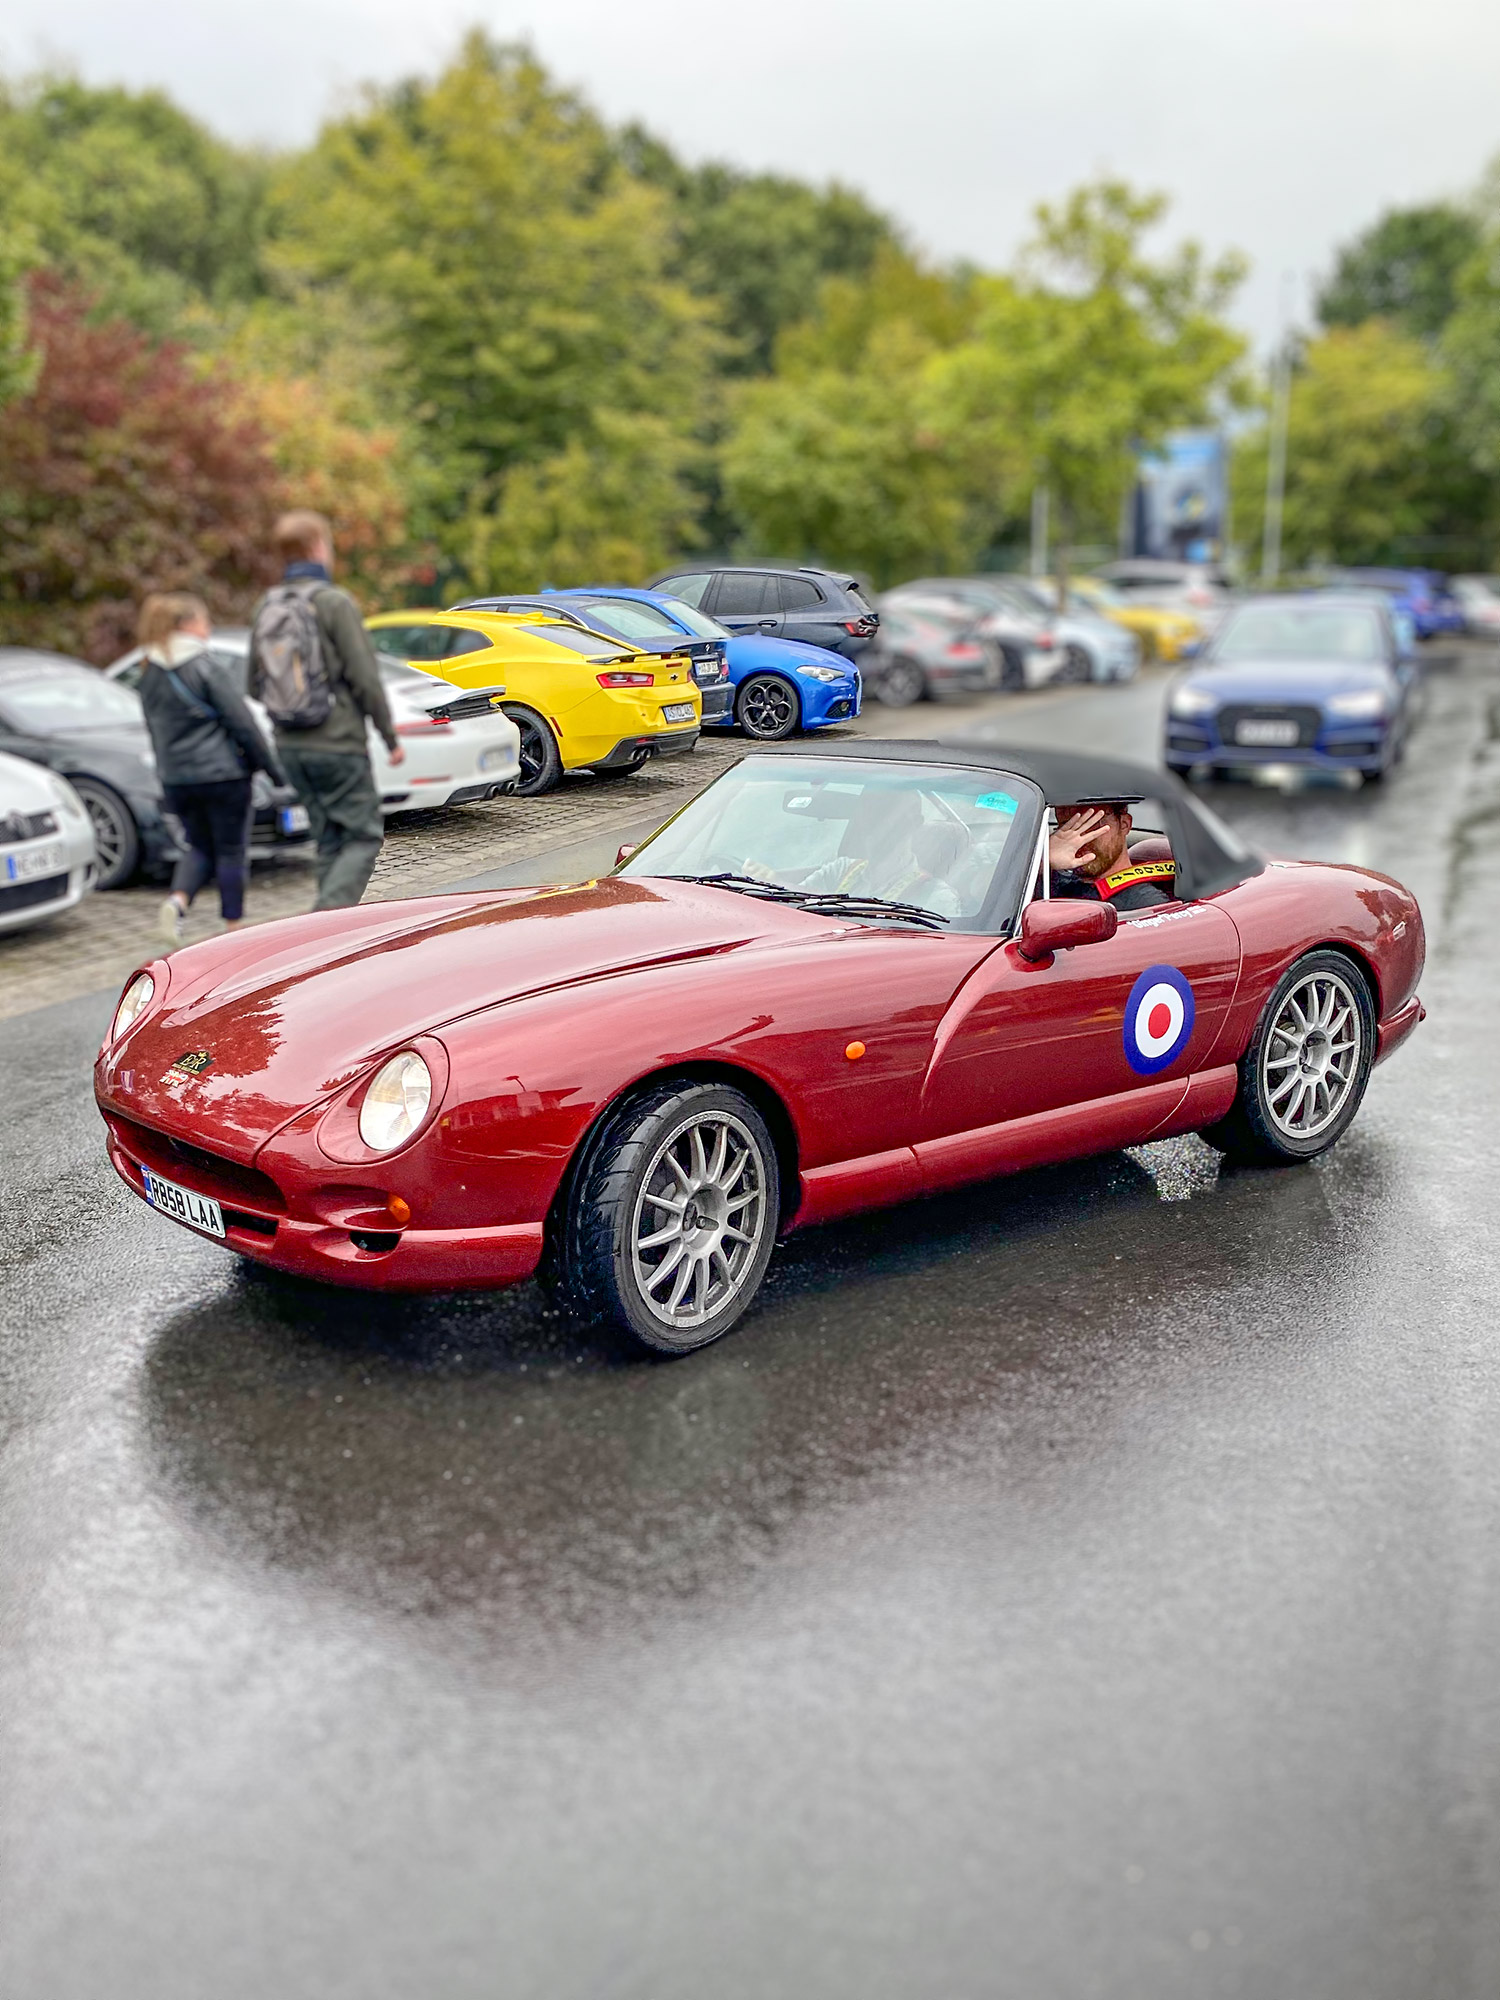 Richie and Rob after the Nurburgring TVR Tour